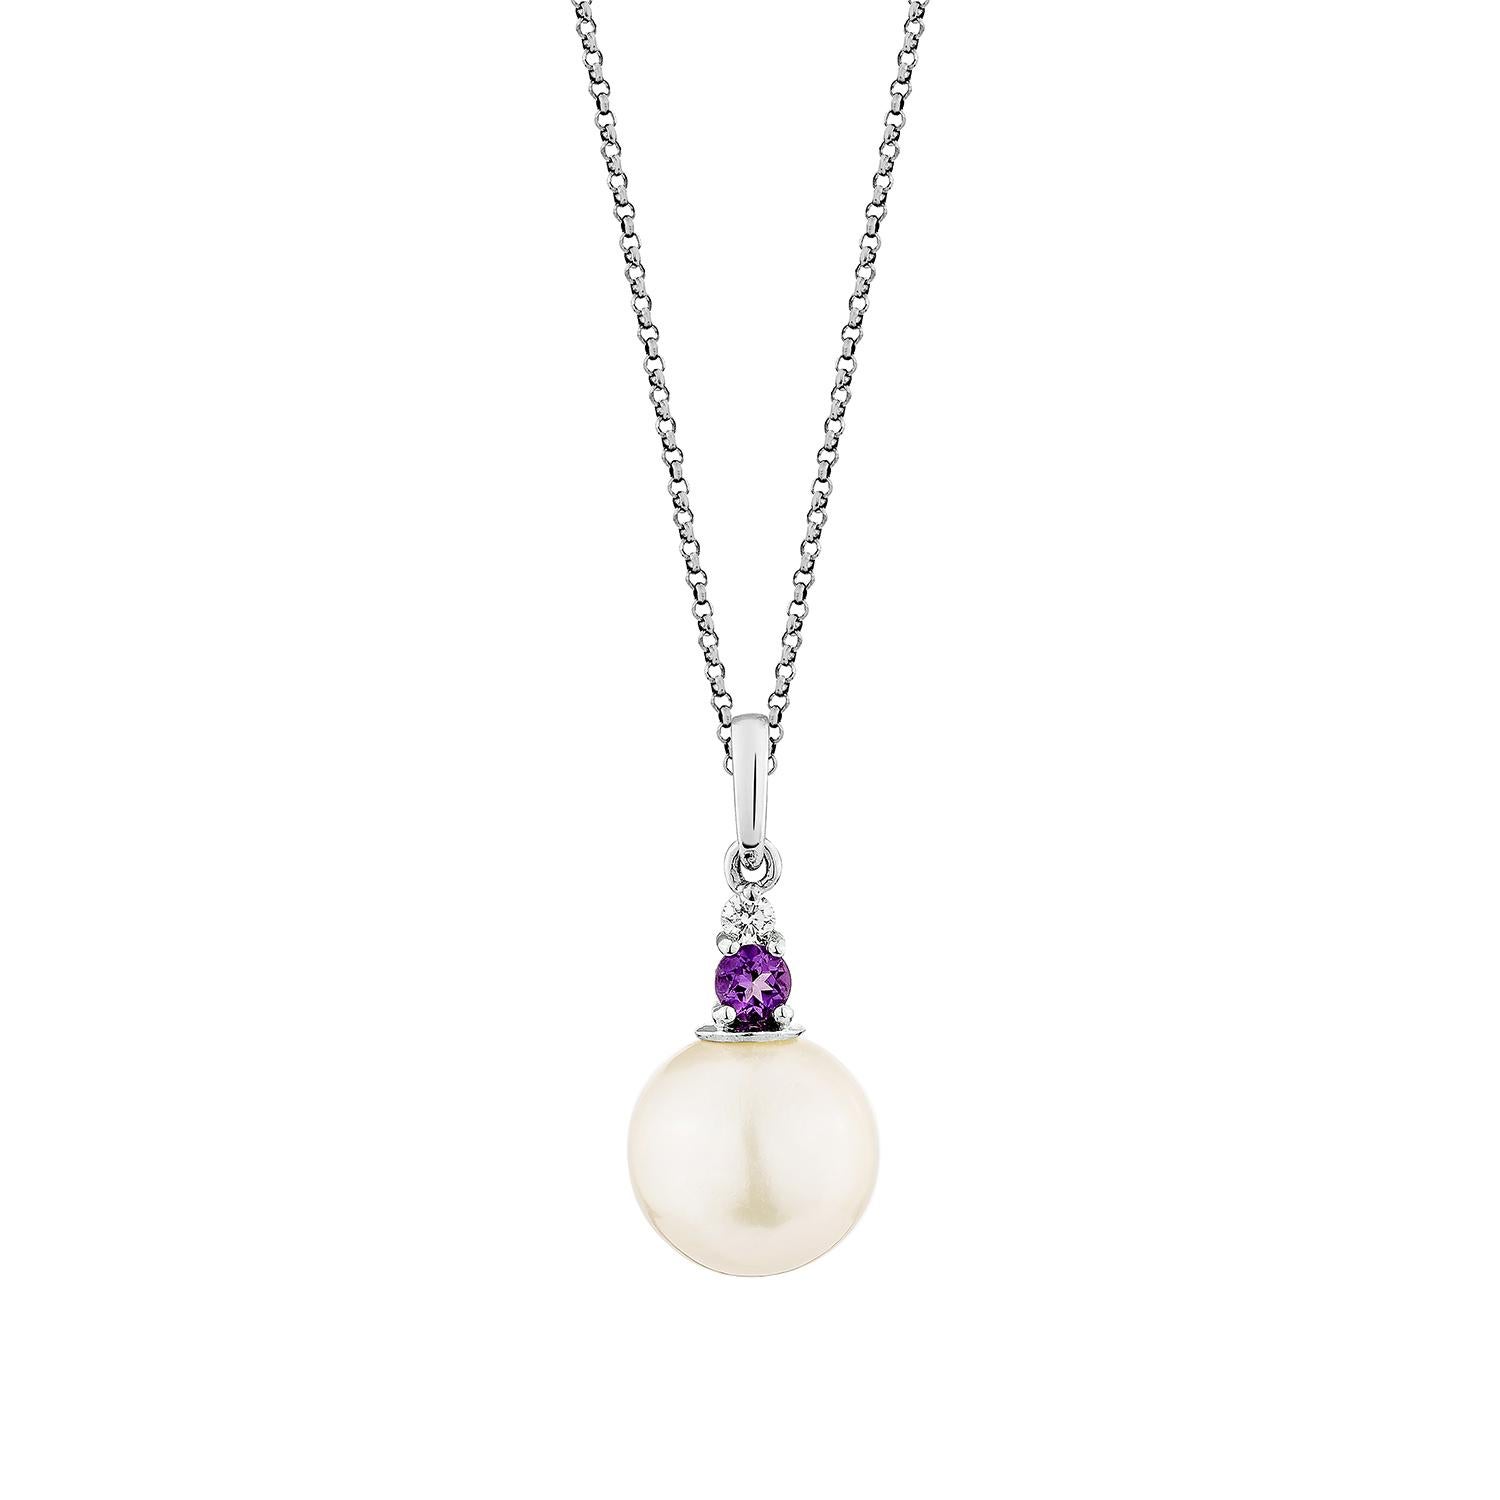 Round Cut 6.34 Carat White Pearl Pendant in 14KWG with Amethyst and White Diamond. For Sale